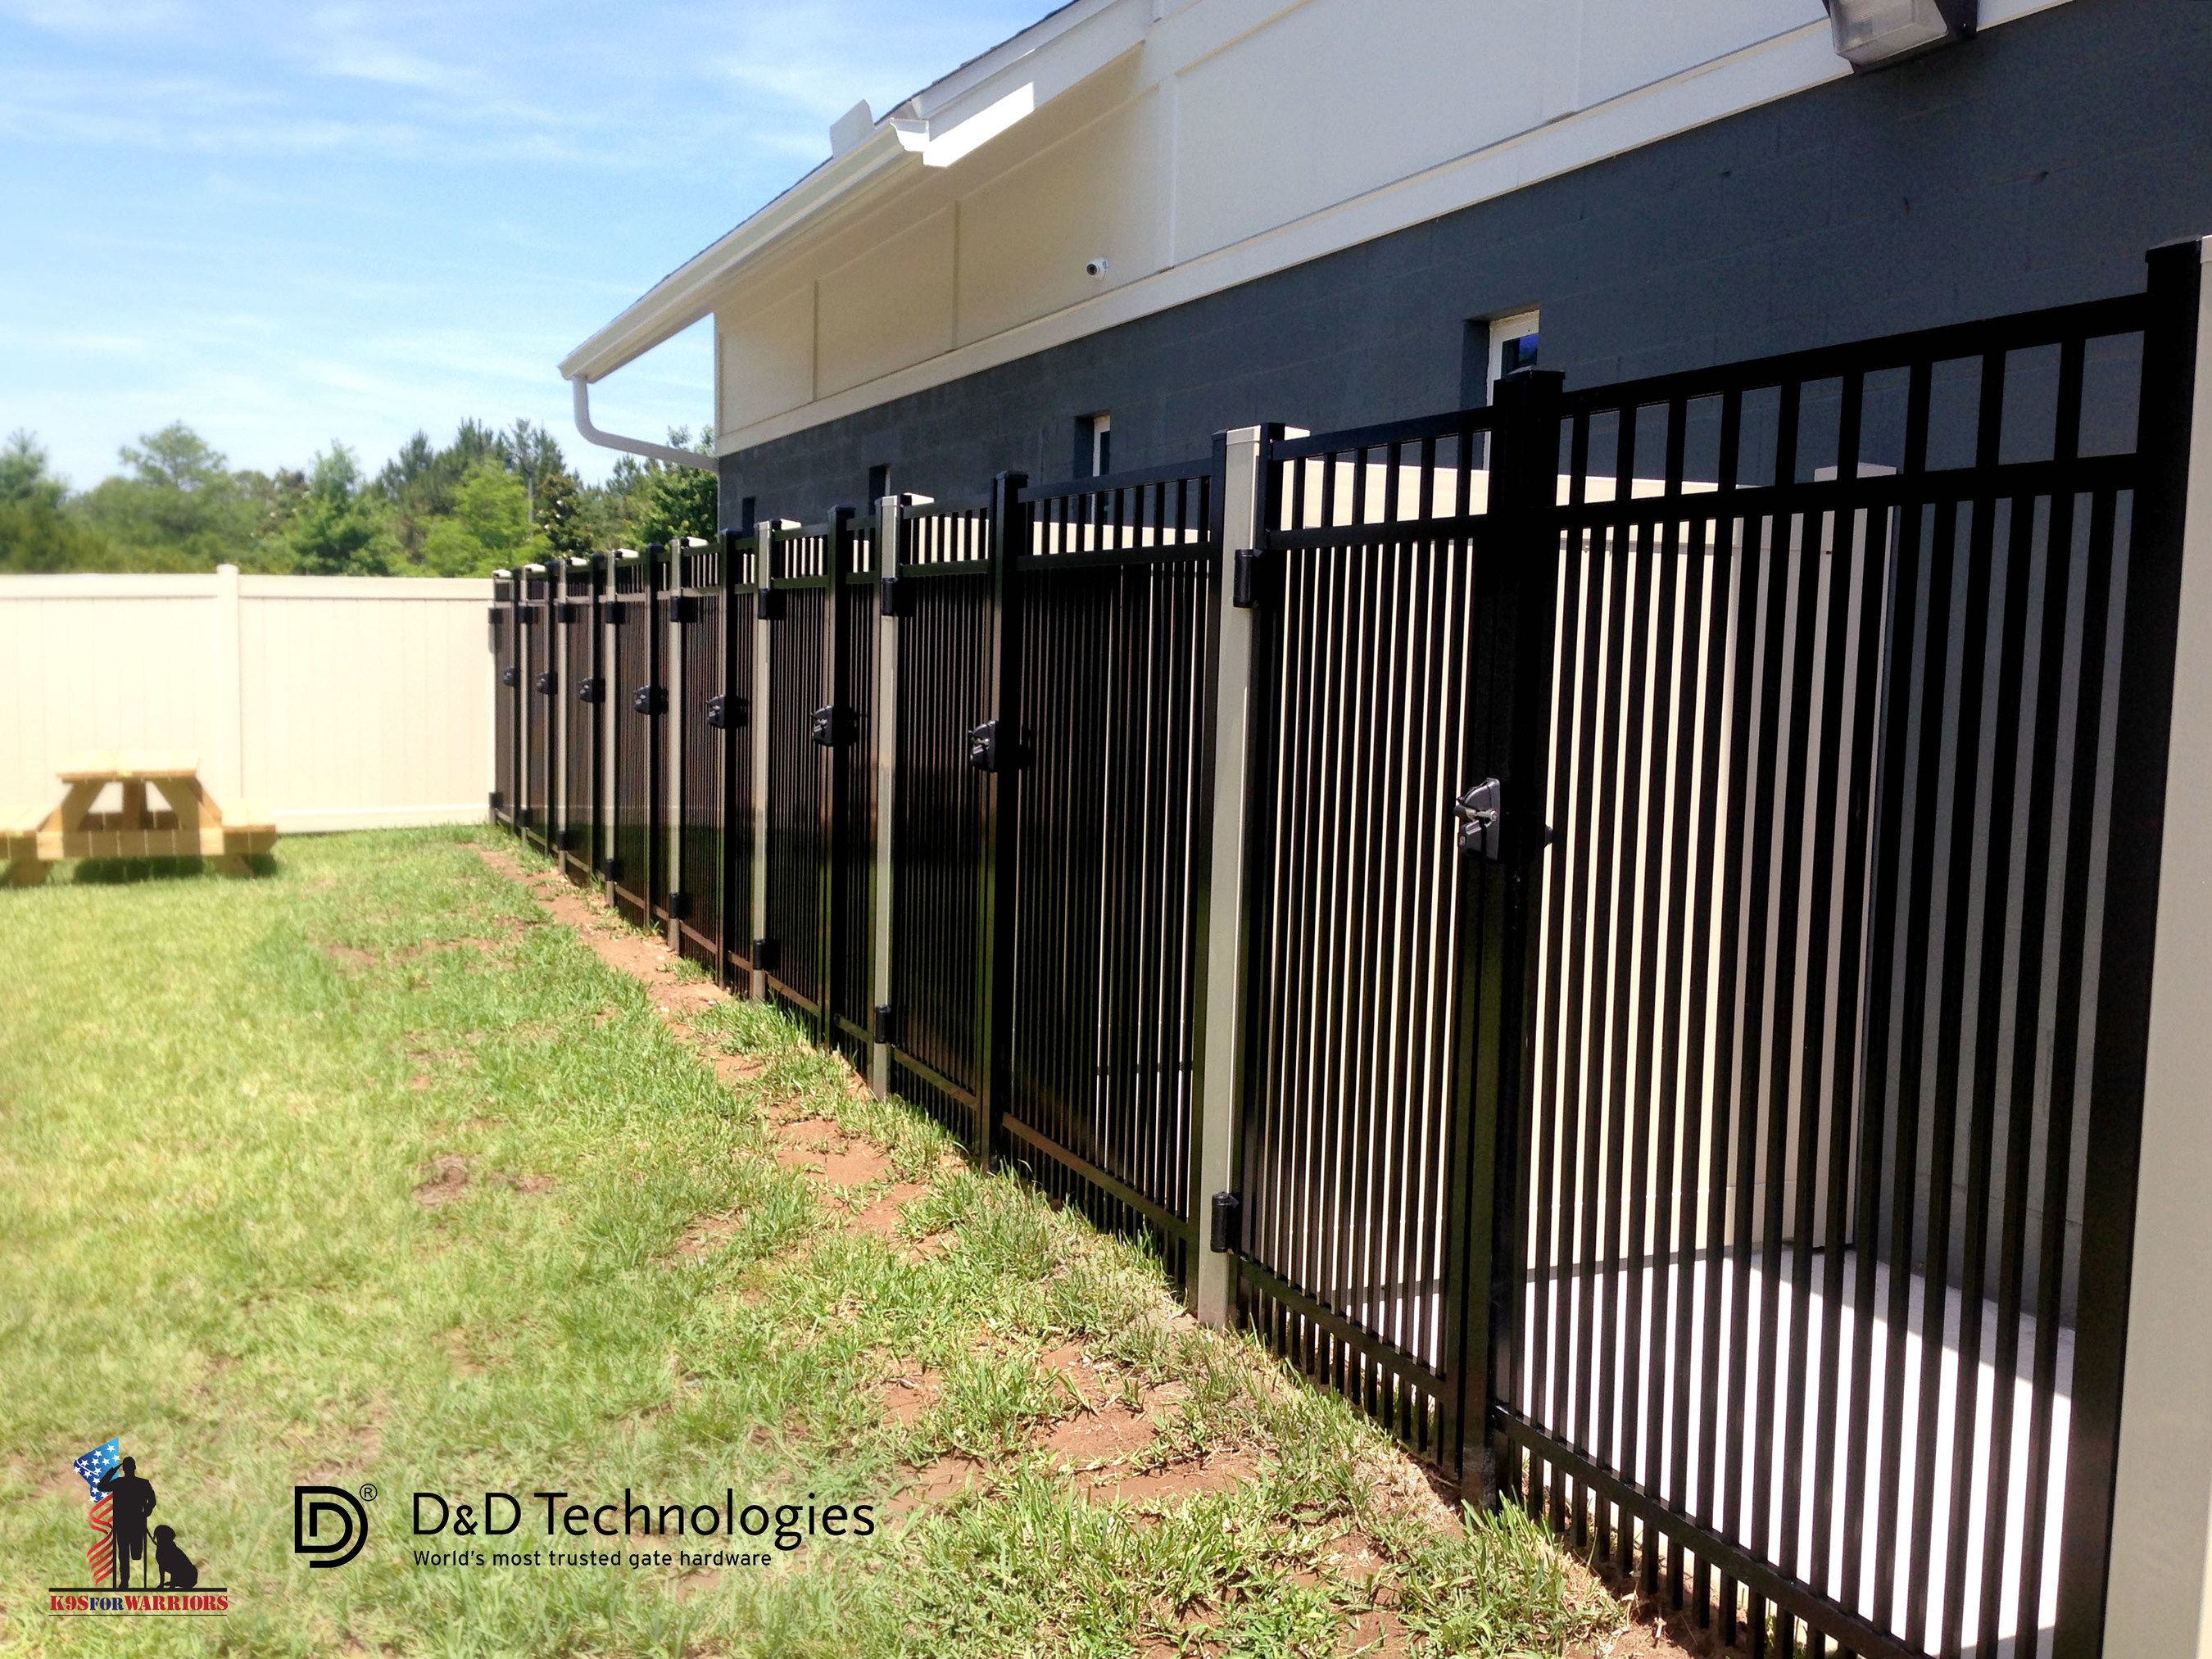 Photo of Camp K9's canine kennels from exterior.